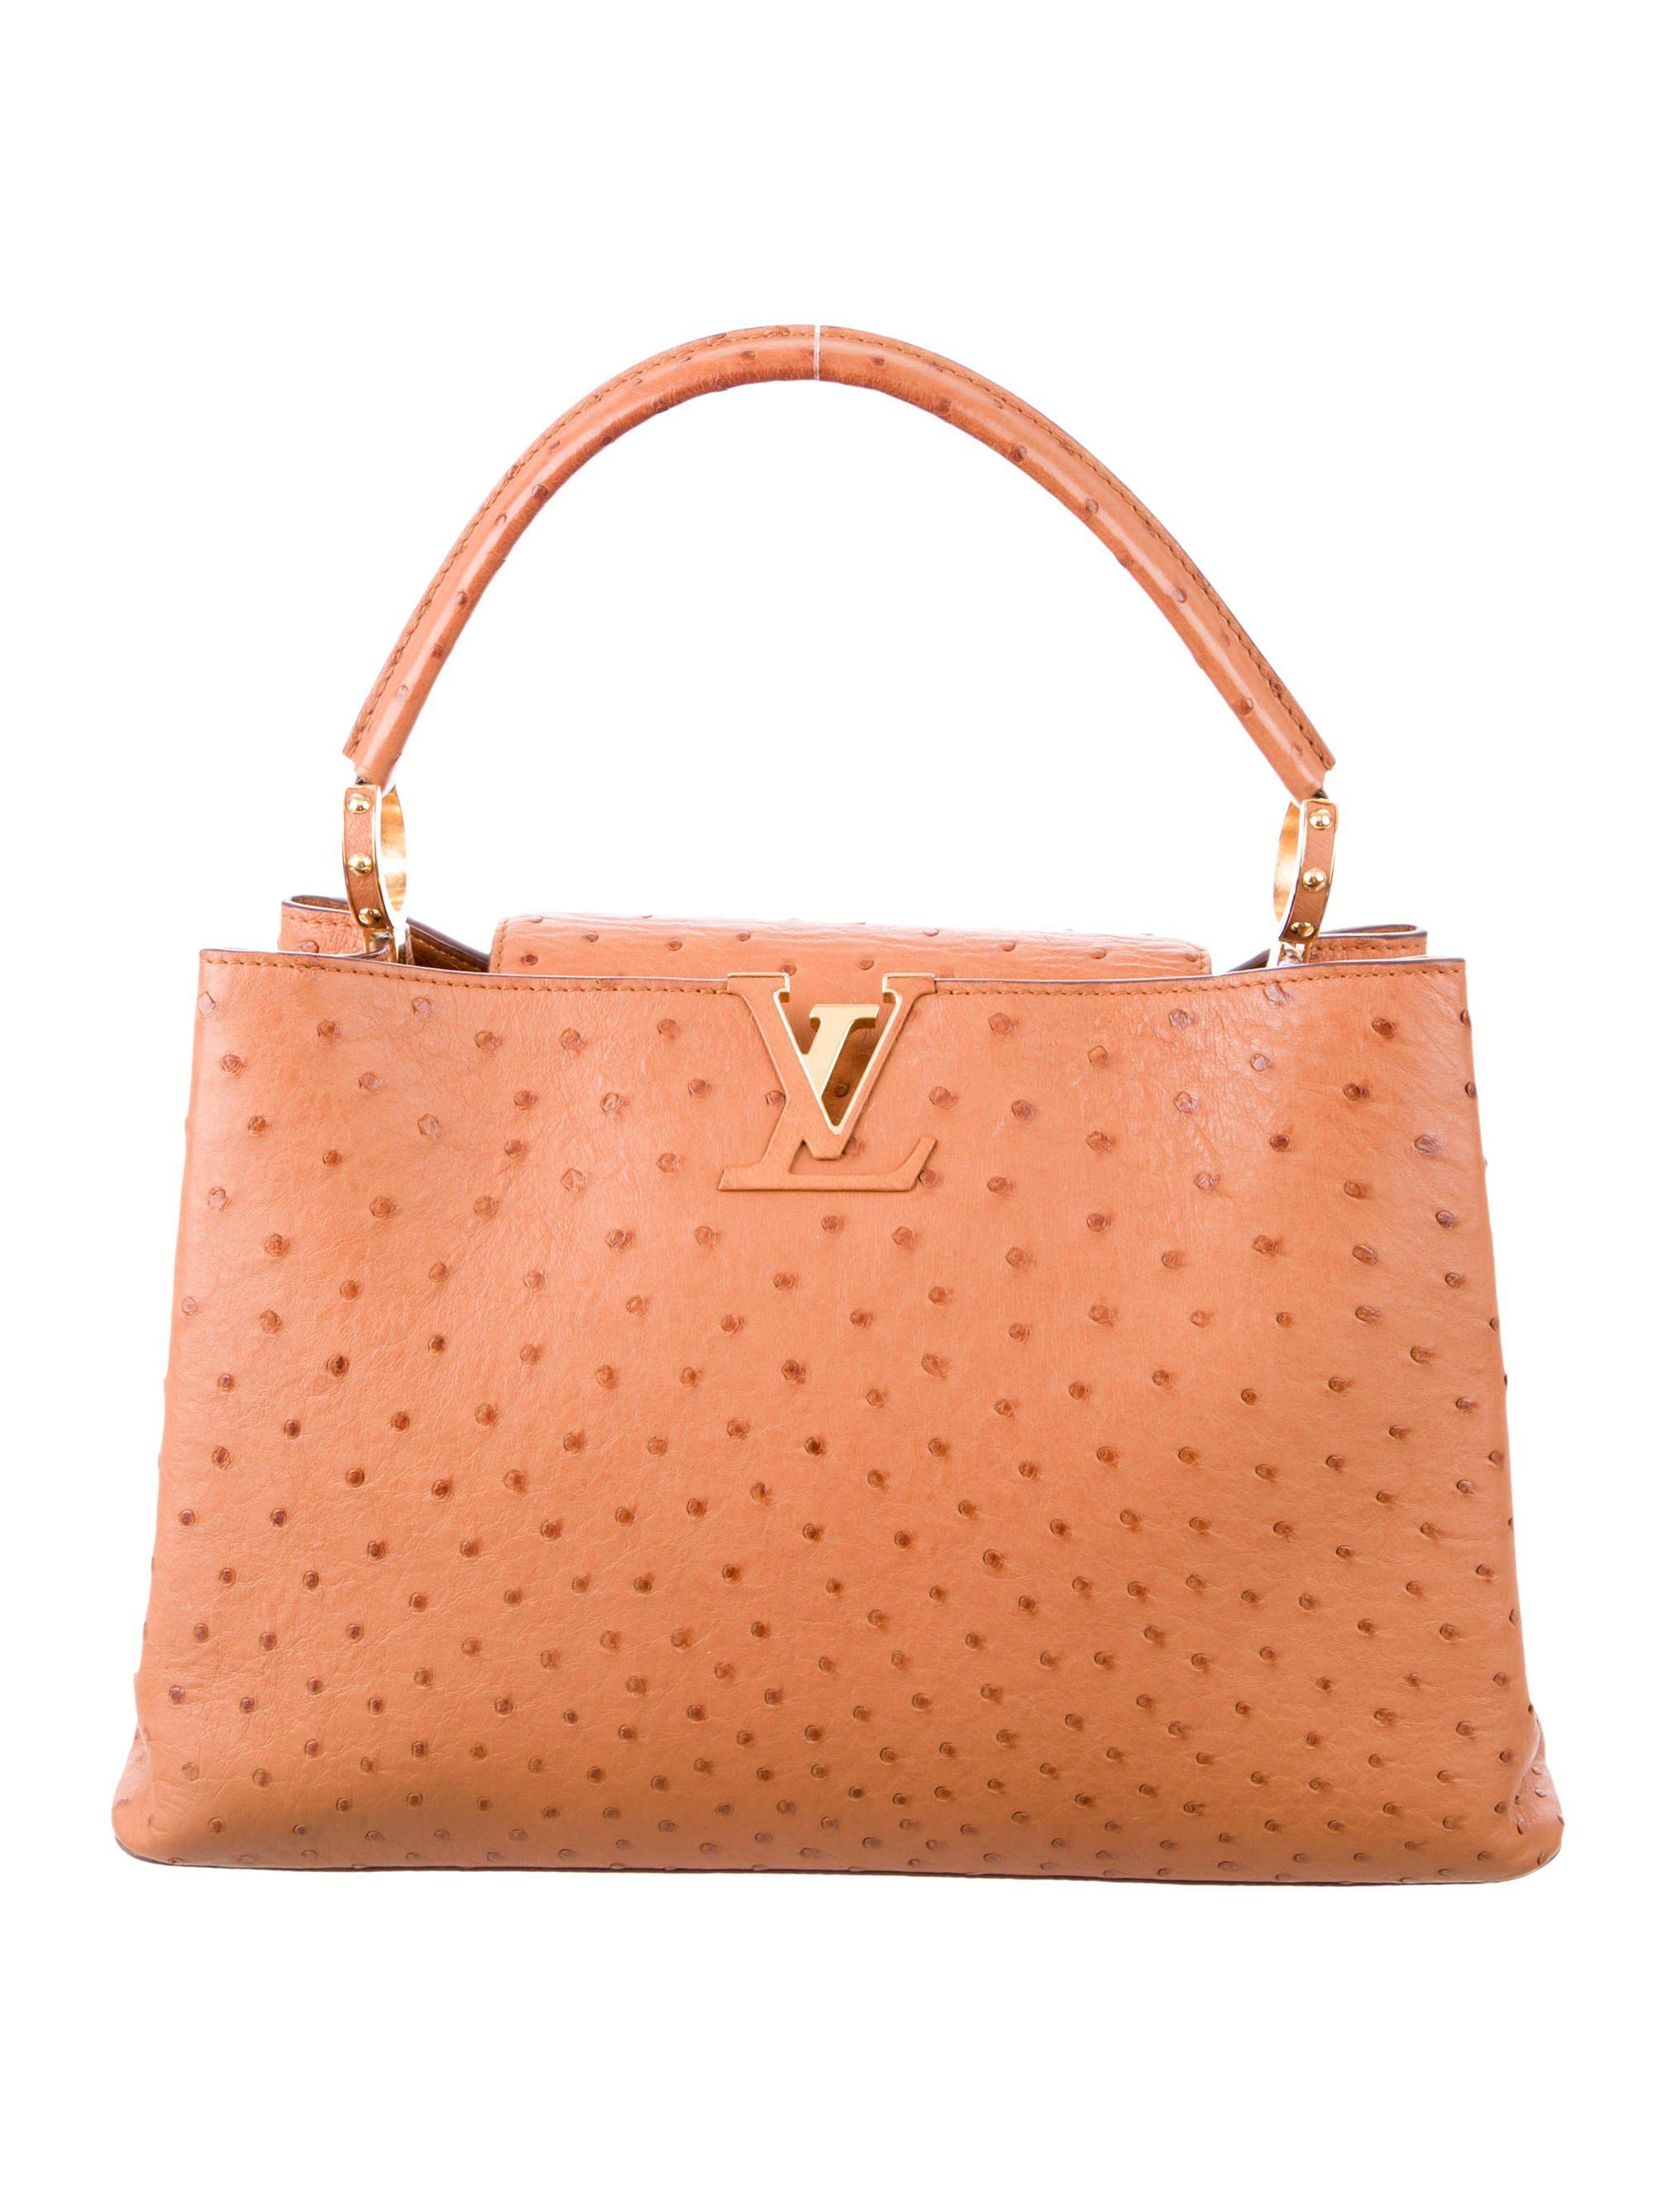 Louis Vuitton Bags 2015 Prices | Confederated Tribes of the Umatilla Indian Reservation